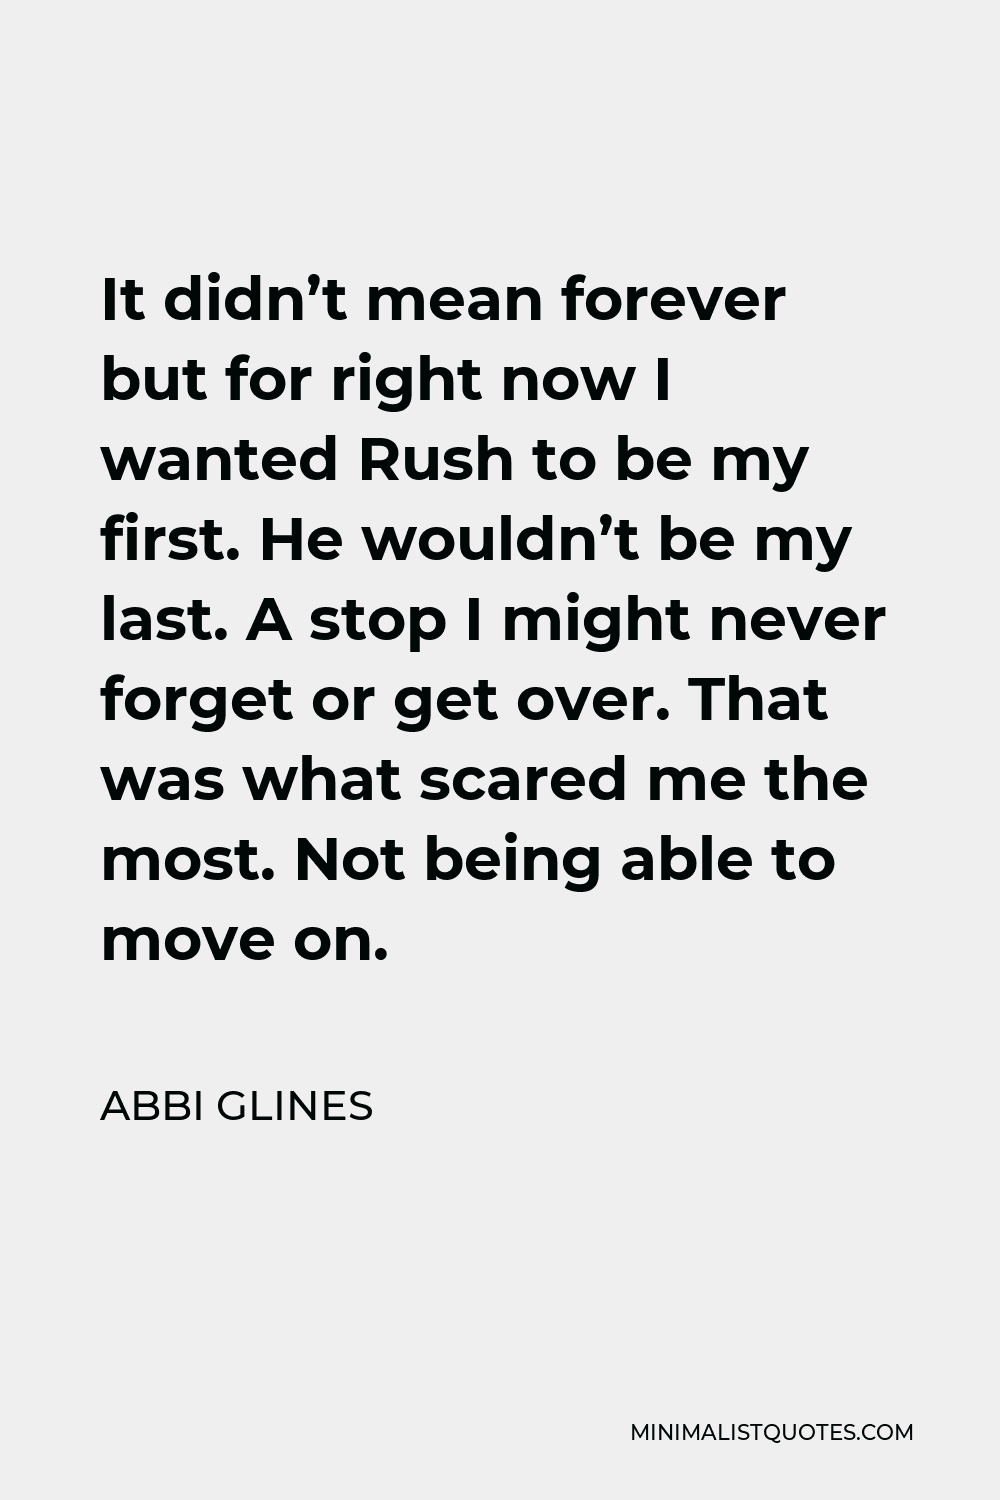 Abbi Glines Quote - It didn’t mean forever but for right now I wanted Rush to be my first. He wouldn’t be my last. A stop I might never forget or get over. That was what scared me the most. Not being able to move on.